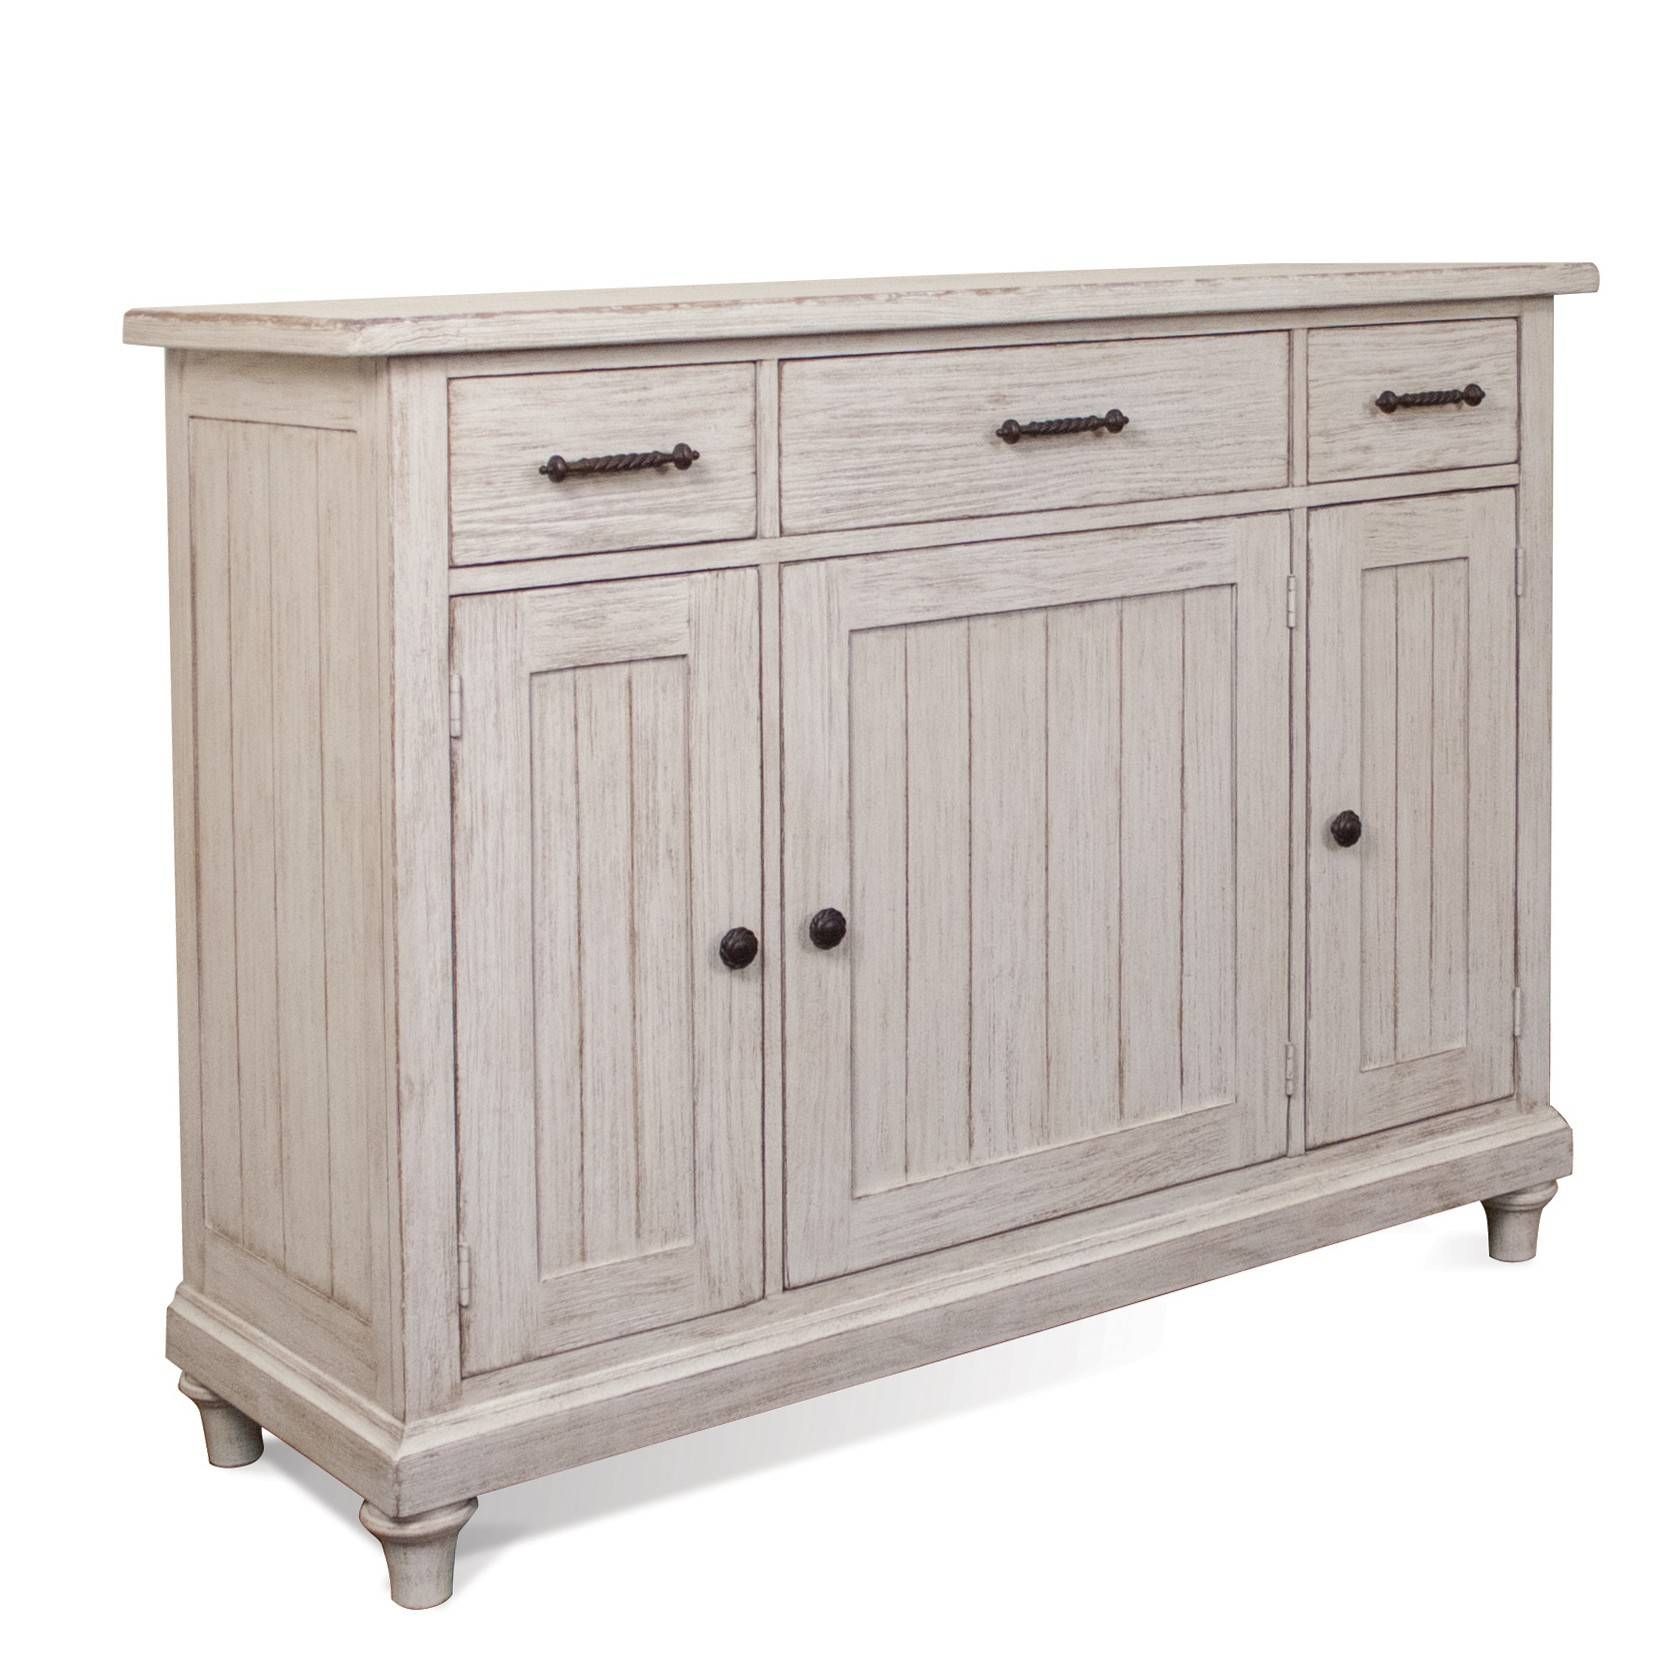 Aberdeen Wood Sideboard Server In Weathered Worn White Intended For White Sideboard Furniture (View 8 of 30)